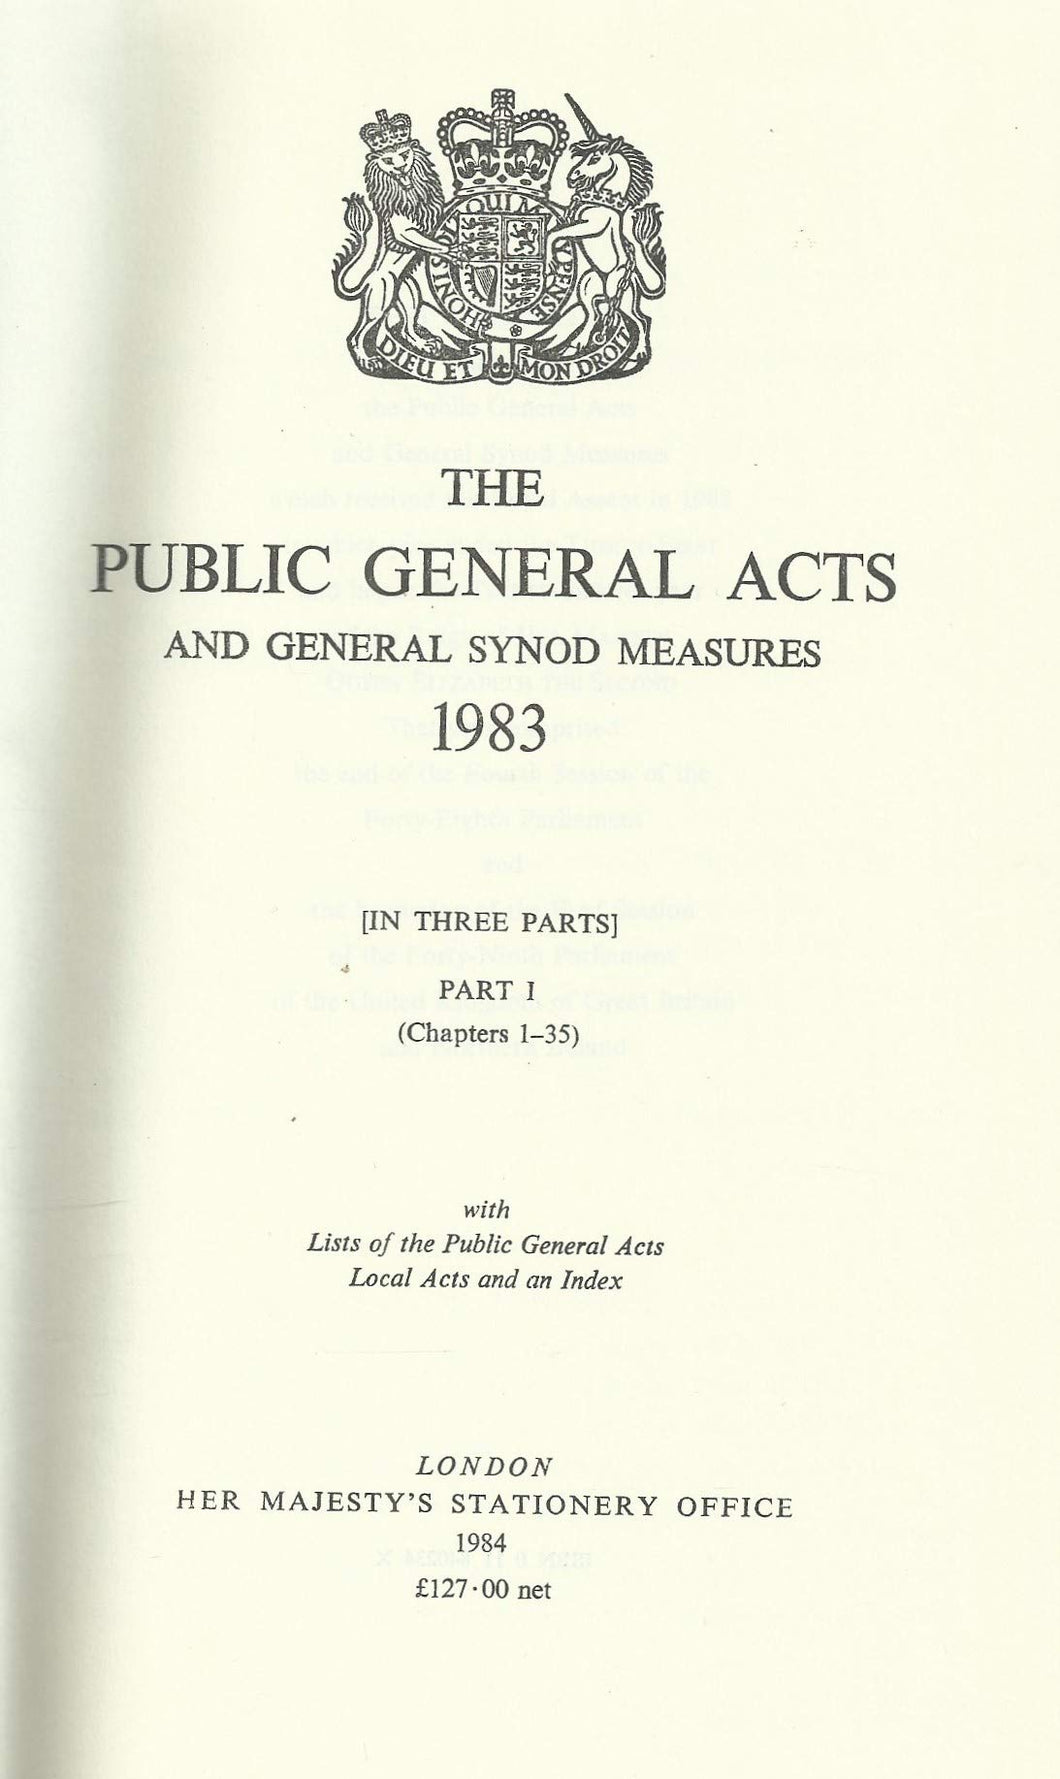 The Public General Acts and General Synod Measures 1983: With Lists of the Public General Acts, Local Acts and an Index